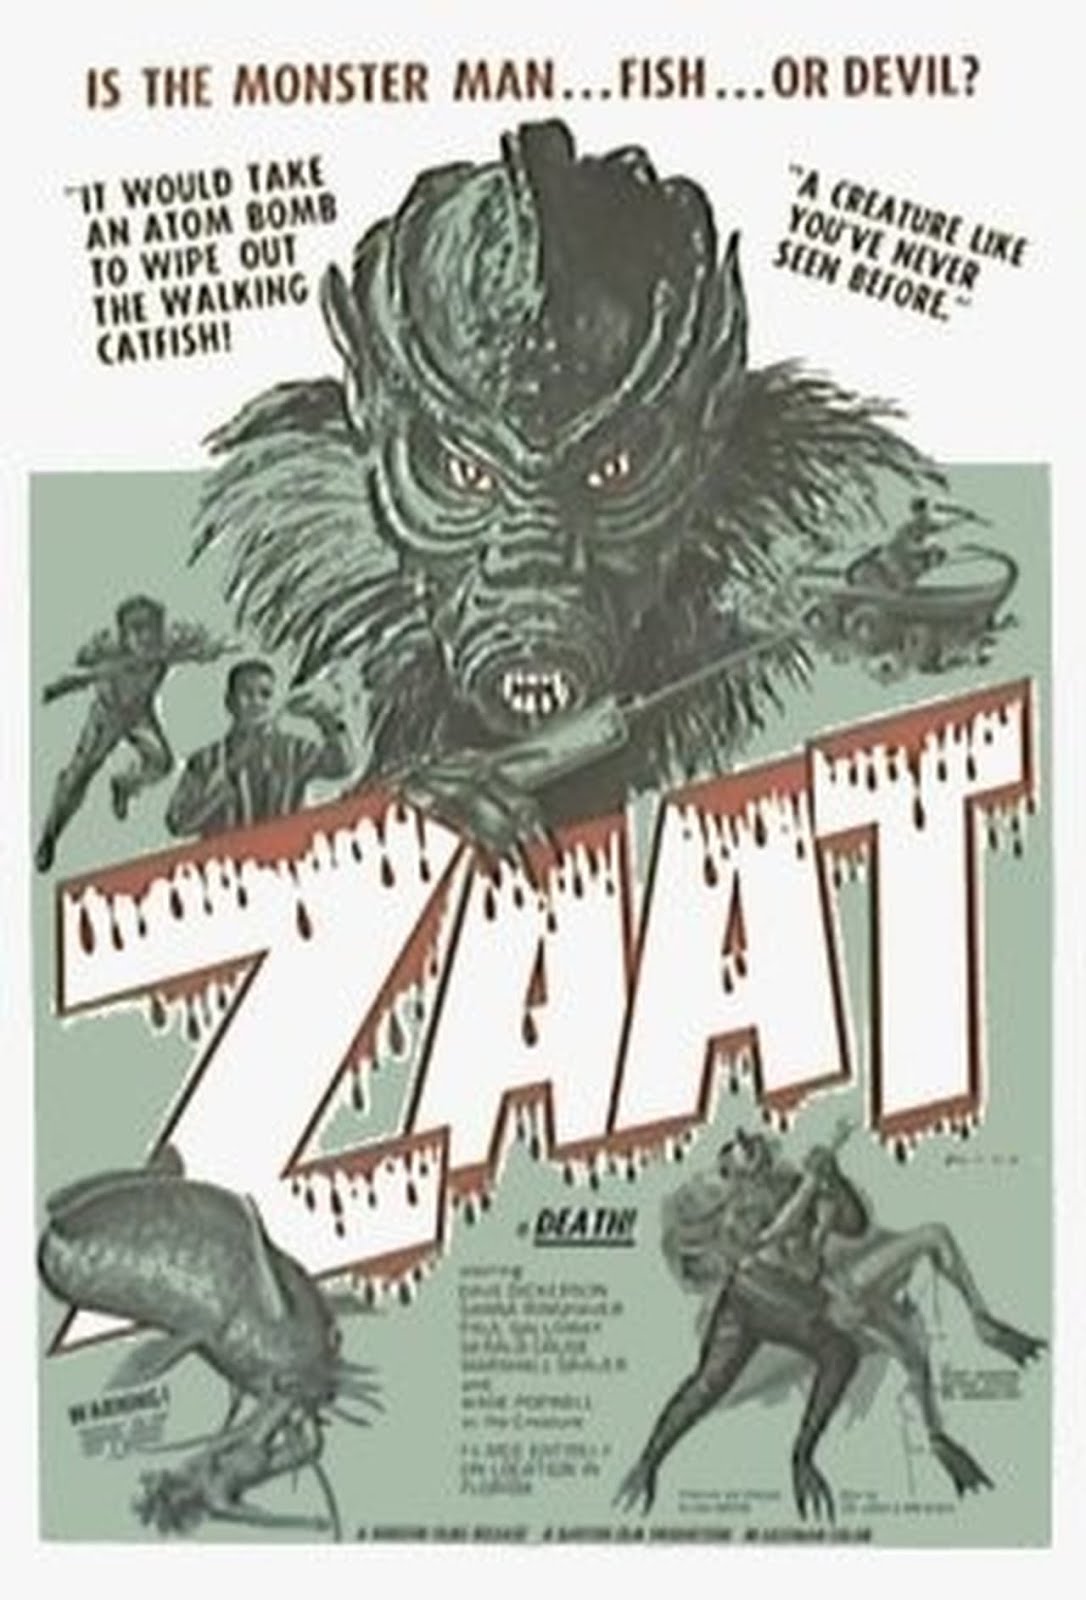 ZAAT (AKA, "The Blood Waters of Dr. Z")